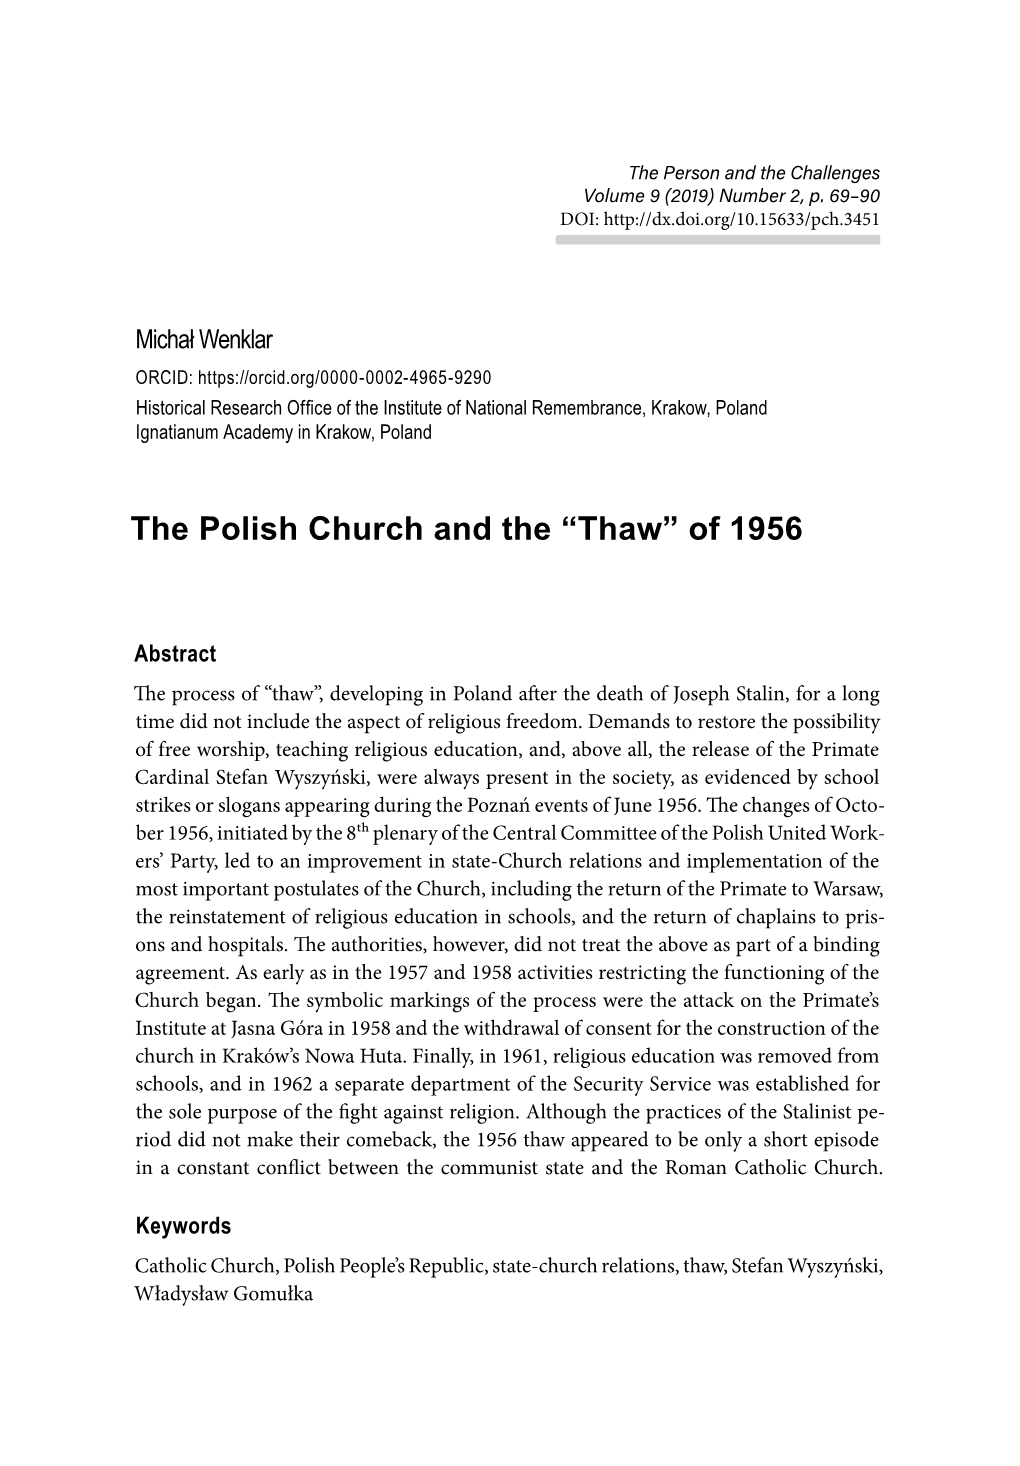 The Polish Church and the “Thaw” of 1956